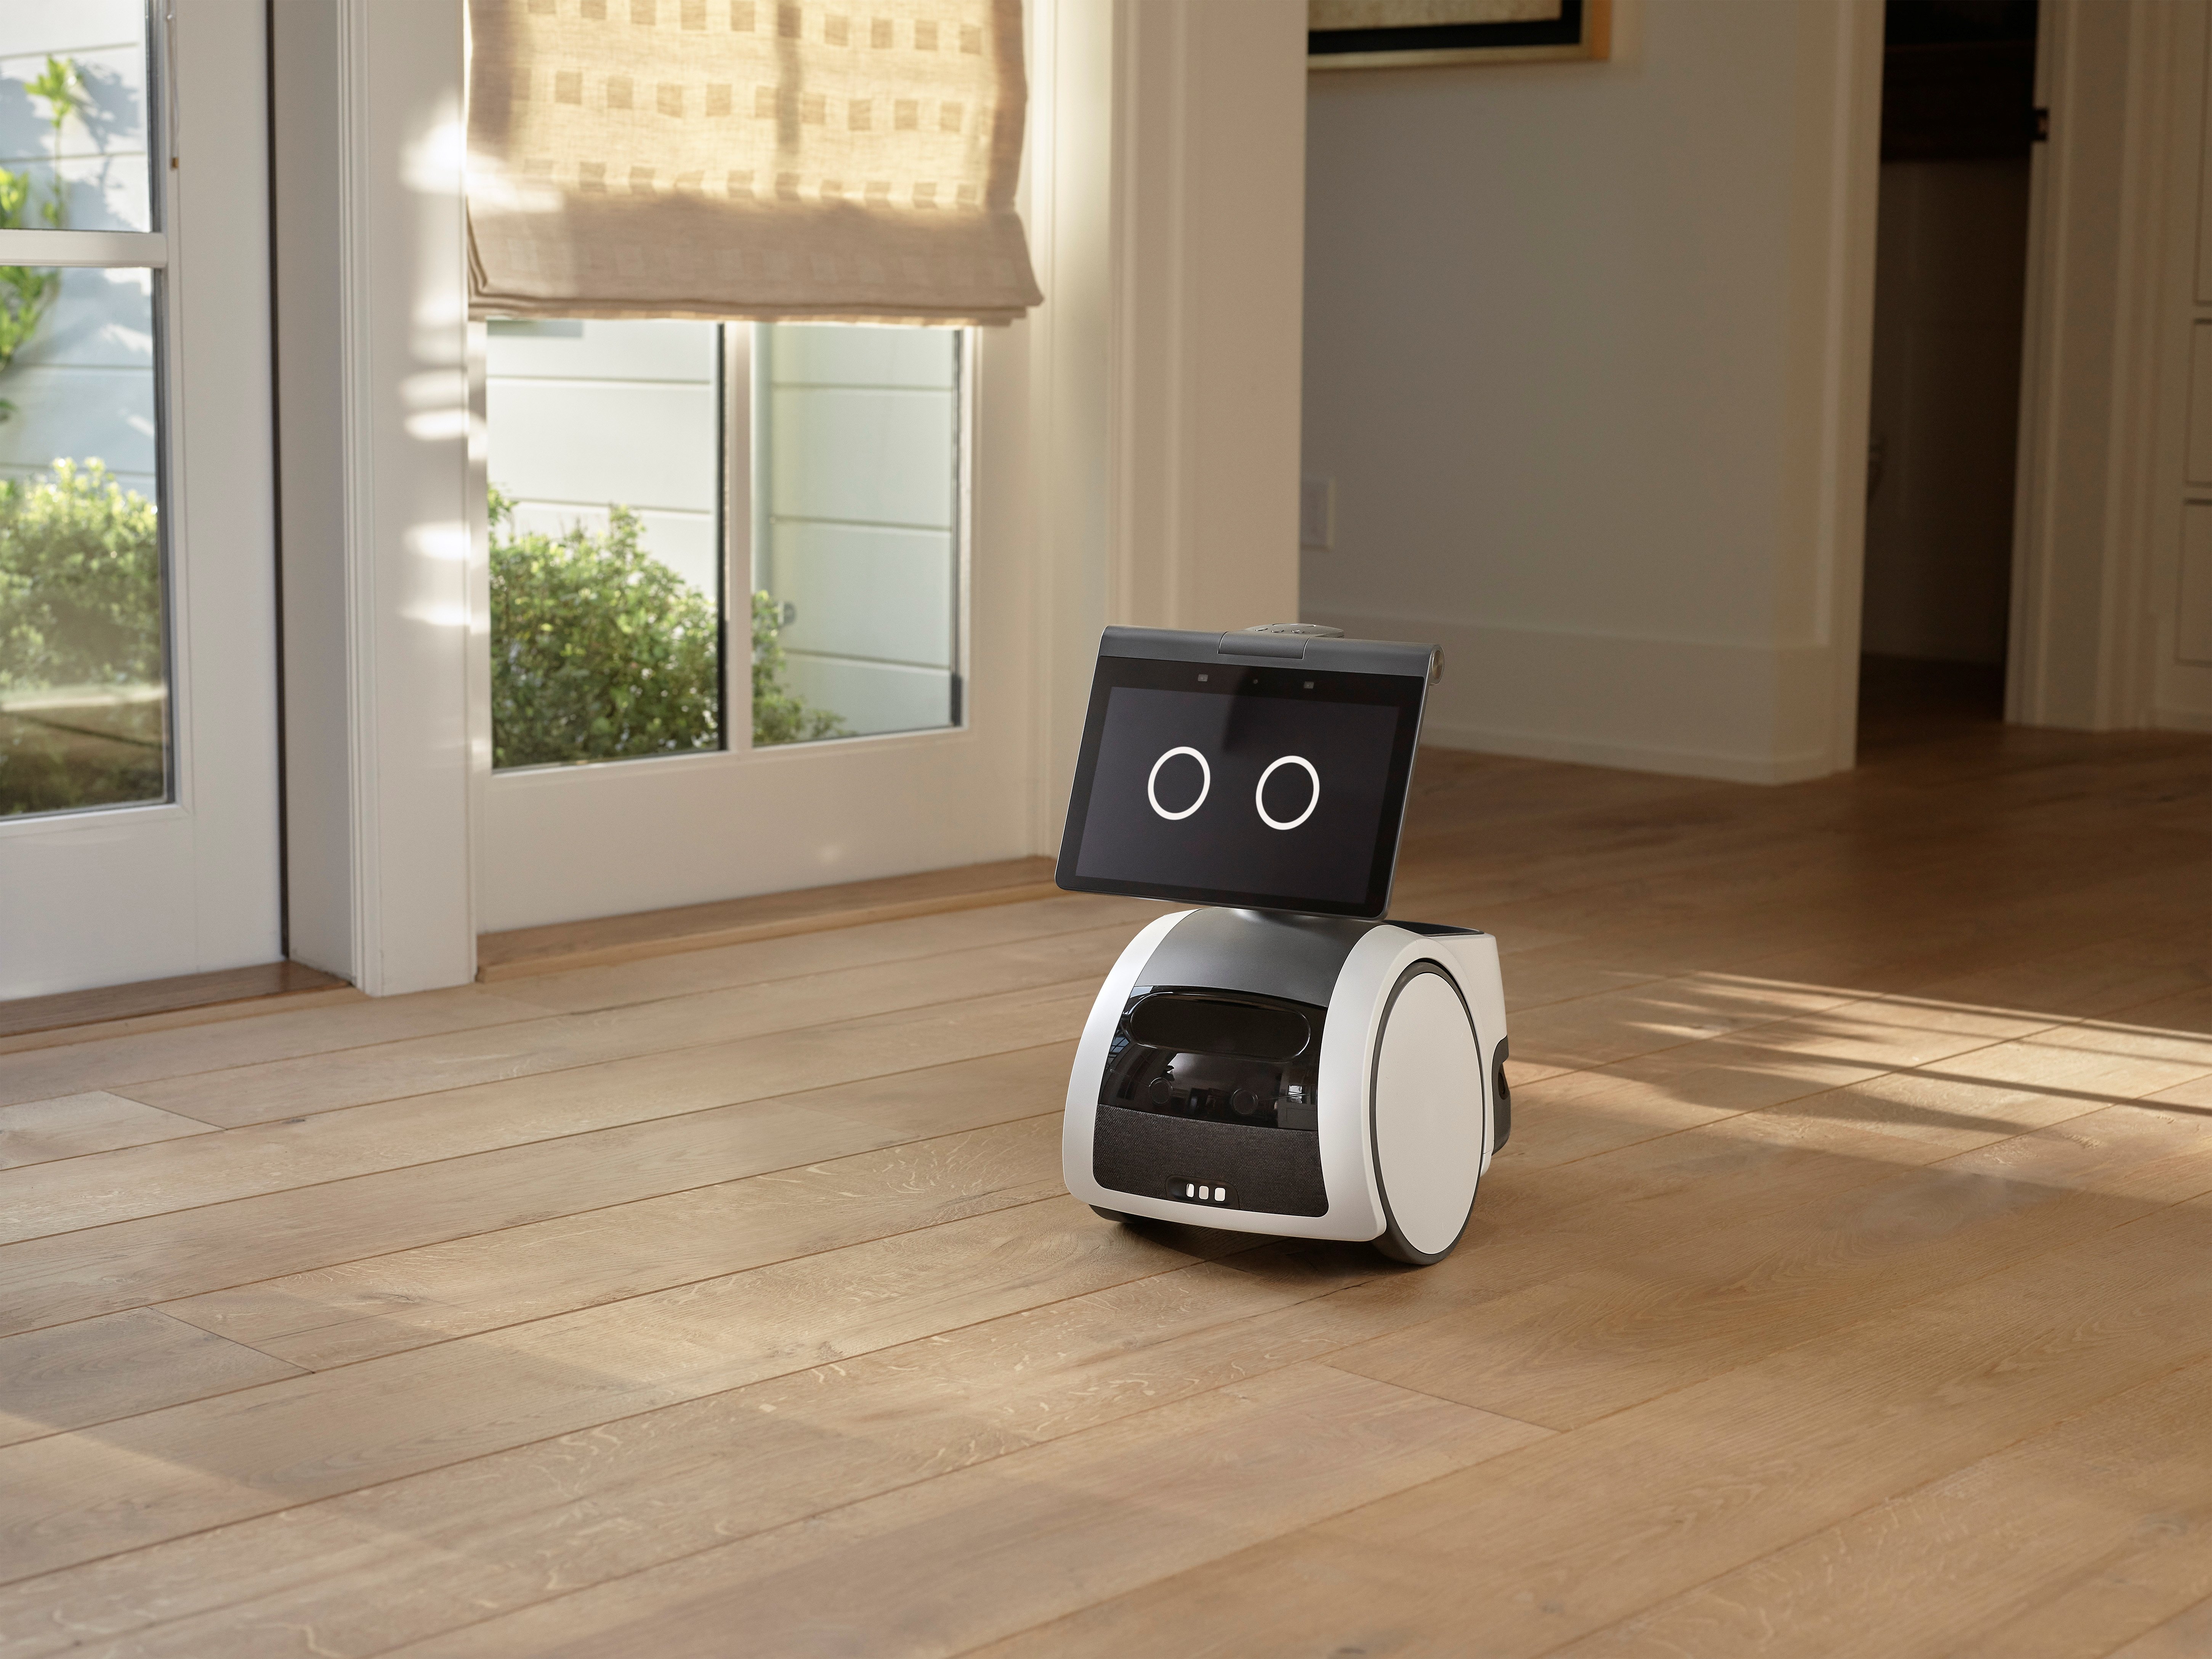 Amazon unveiled a camera-equipped robot on Tuesday